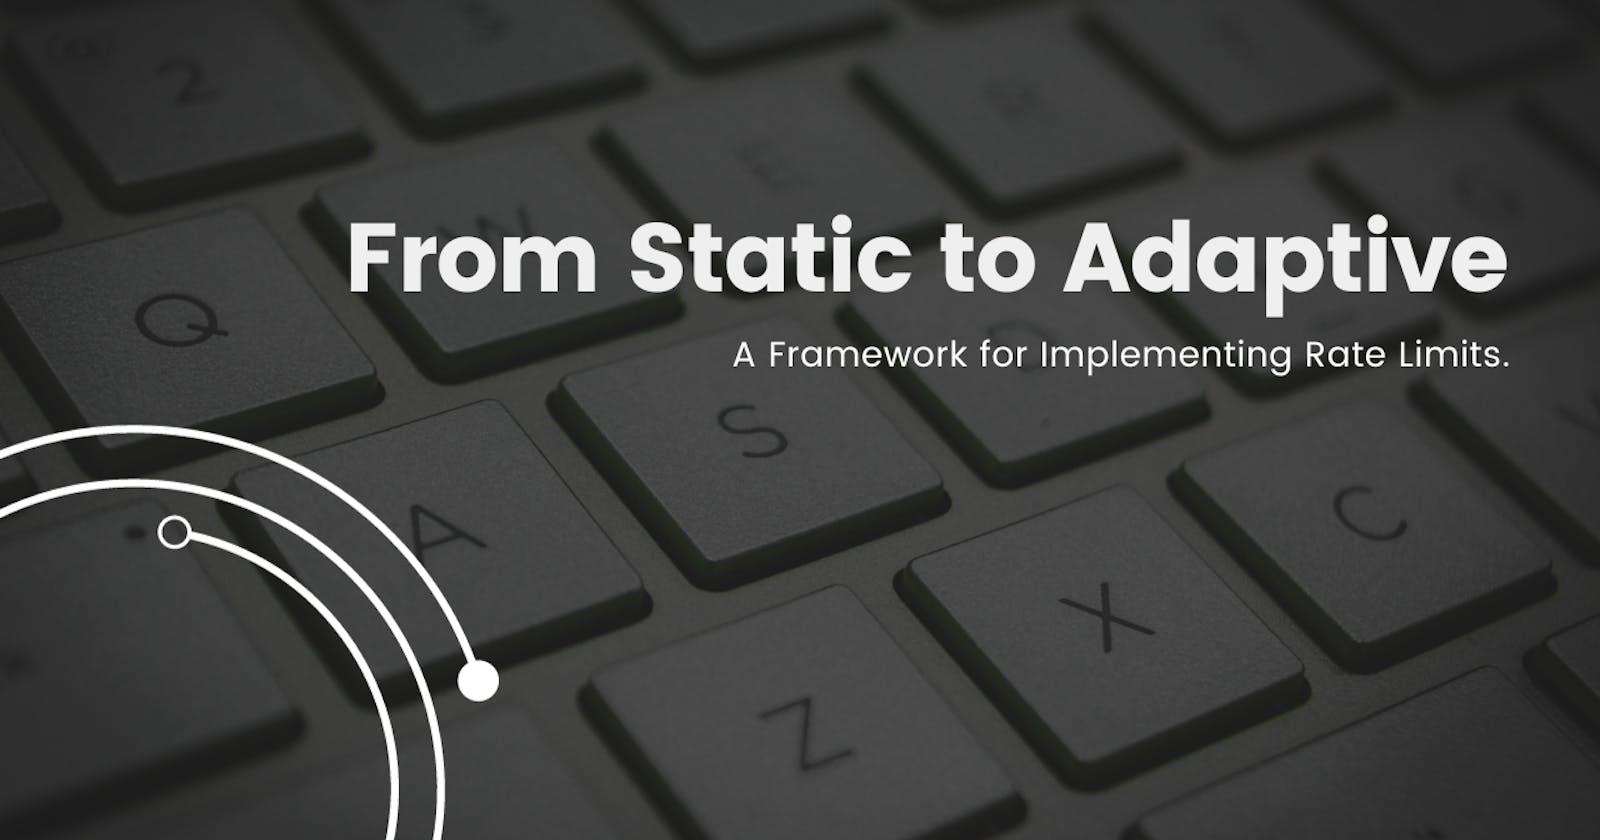 From Static to Adaptive